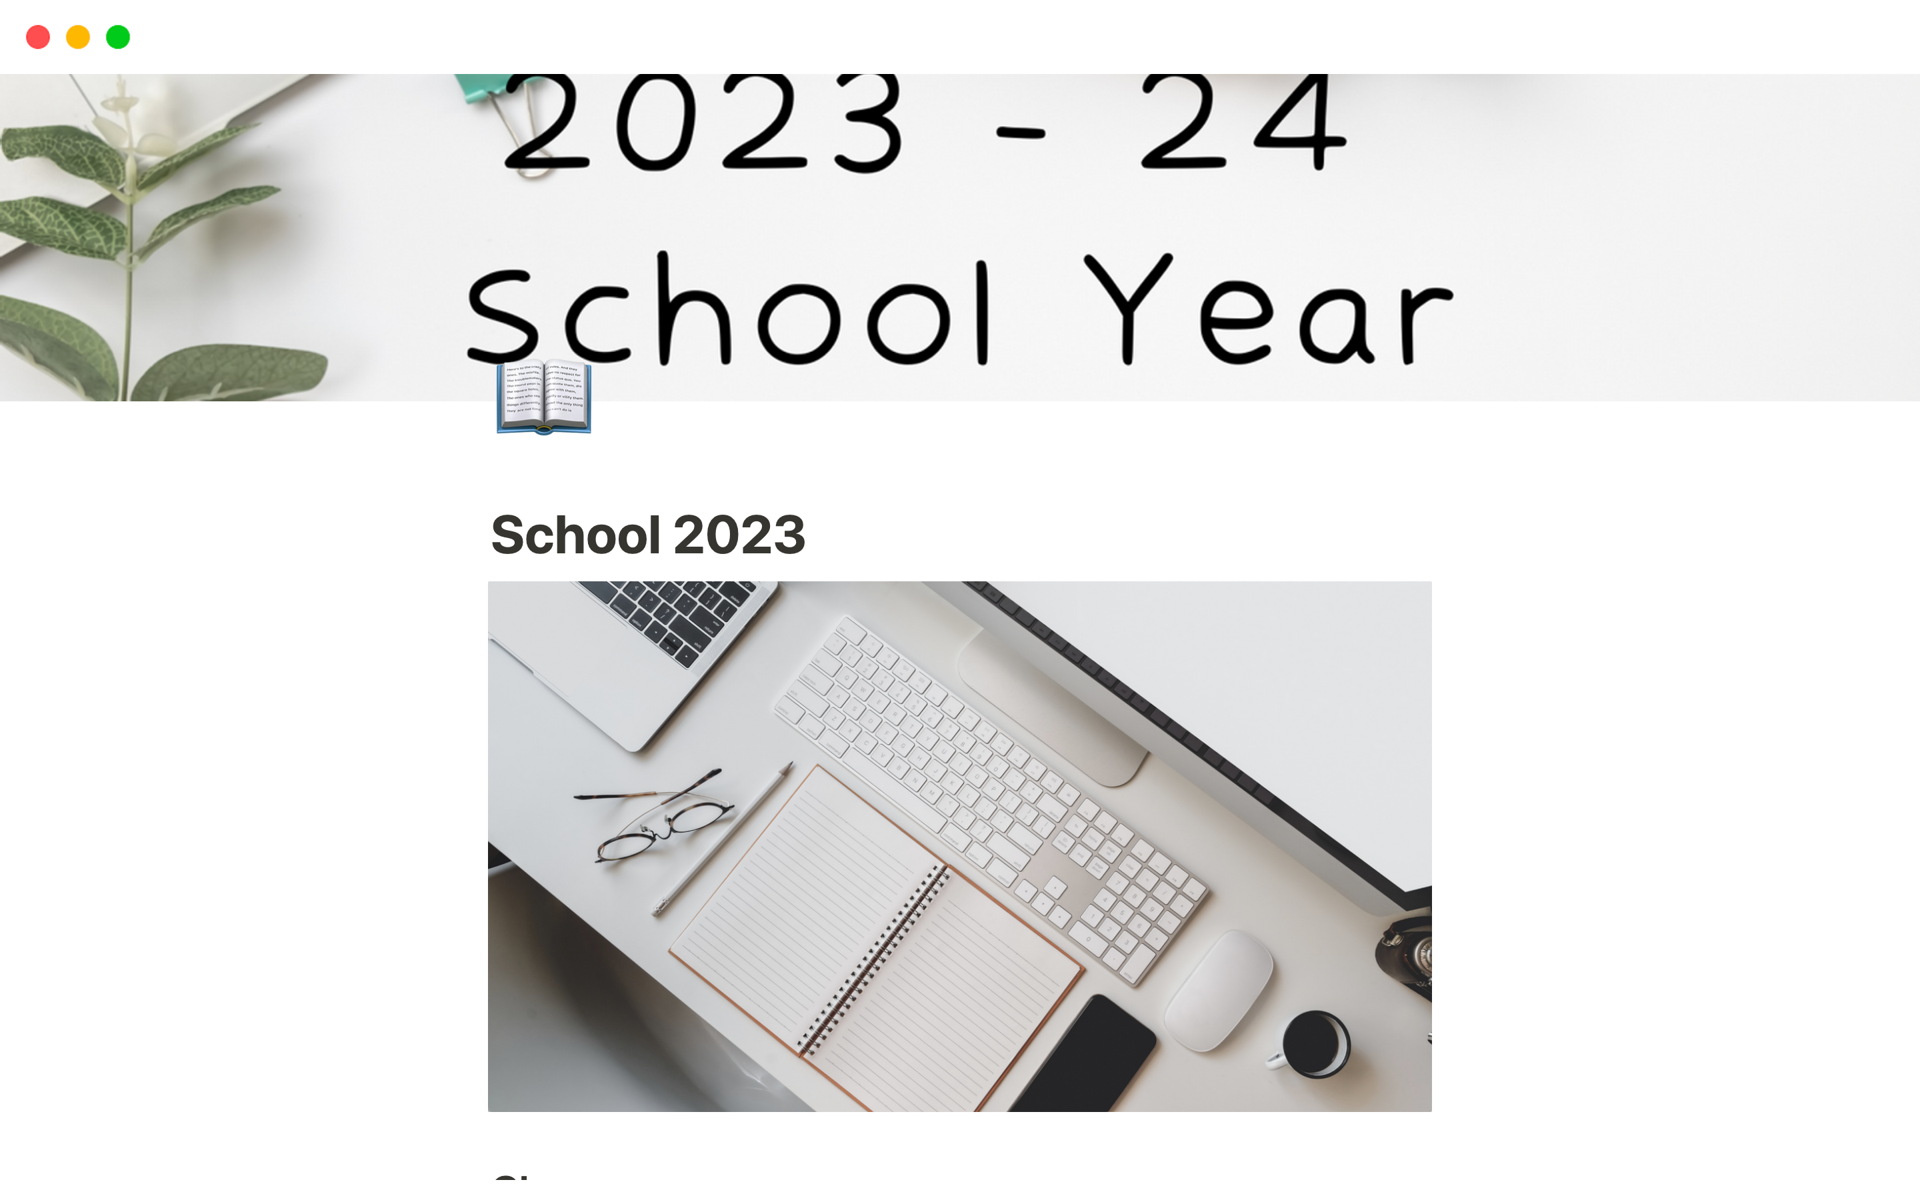 Get ready for the 2023-24 school year and stay organised throughout! 